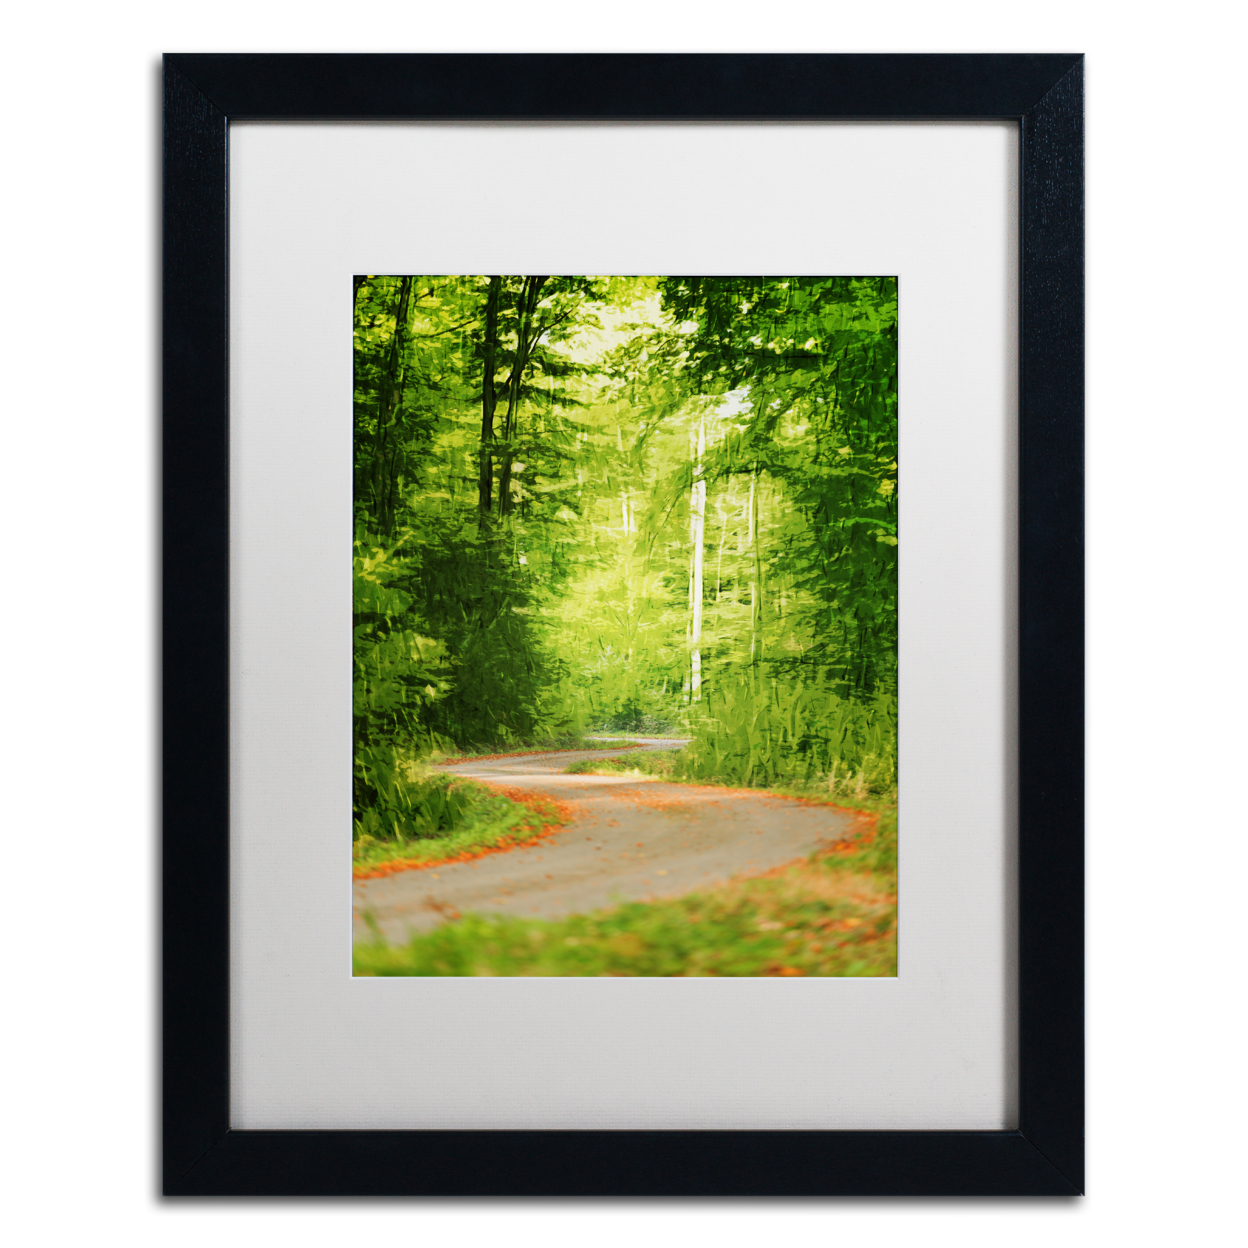 Philippe Sainte-Laudy 'S Road' Black Wooden Framed Art 18 X 22 Inches